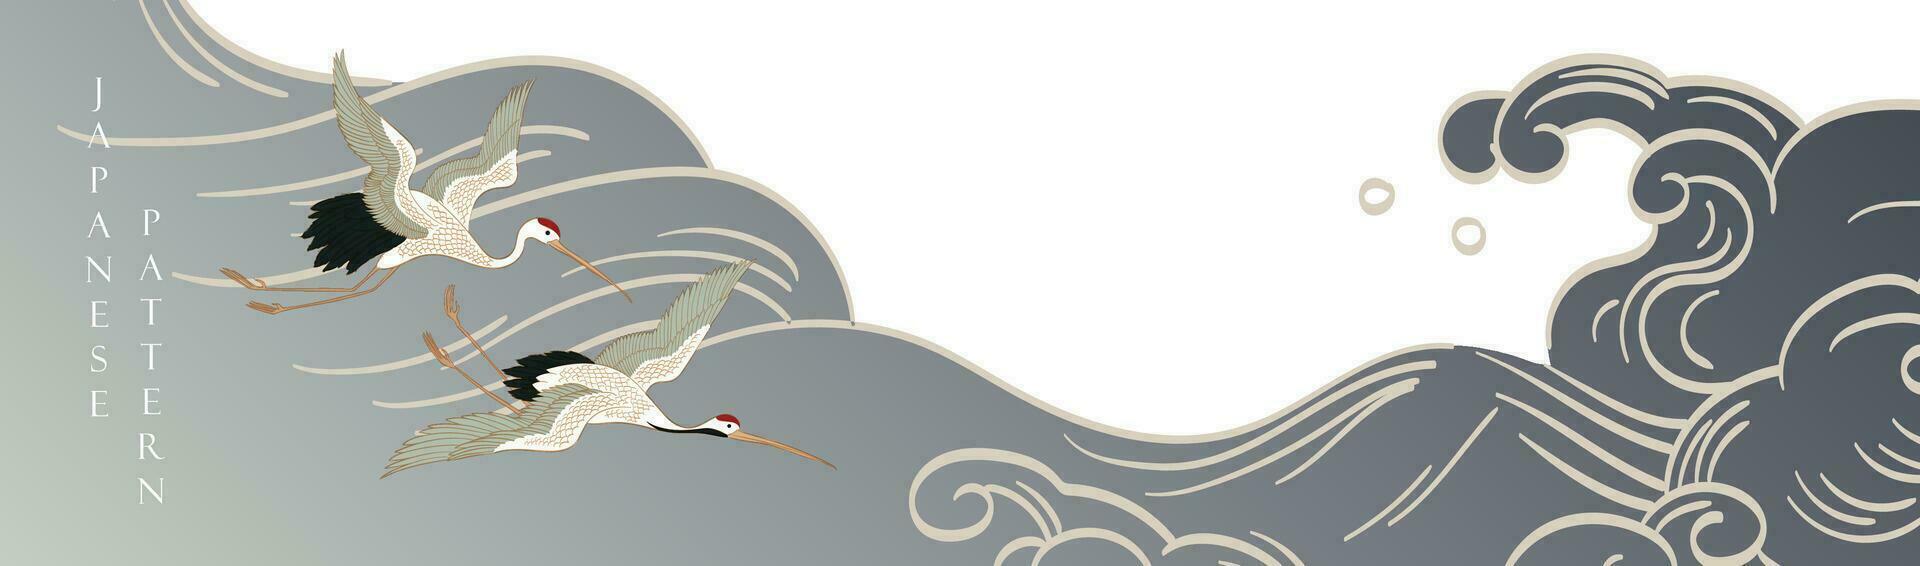 Crane bird decoration vector. Japanese background with hand drawn wave pattern. Ocean sea banner design with natural landscape banner template in vintage style. vector